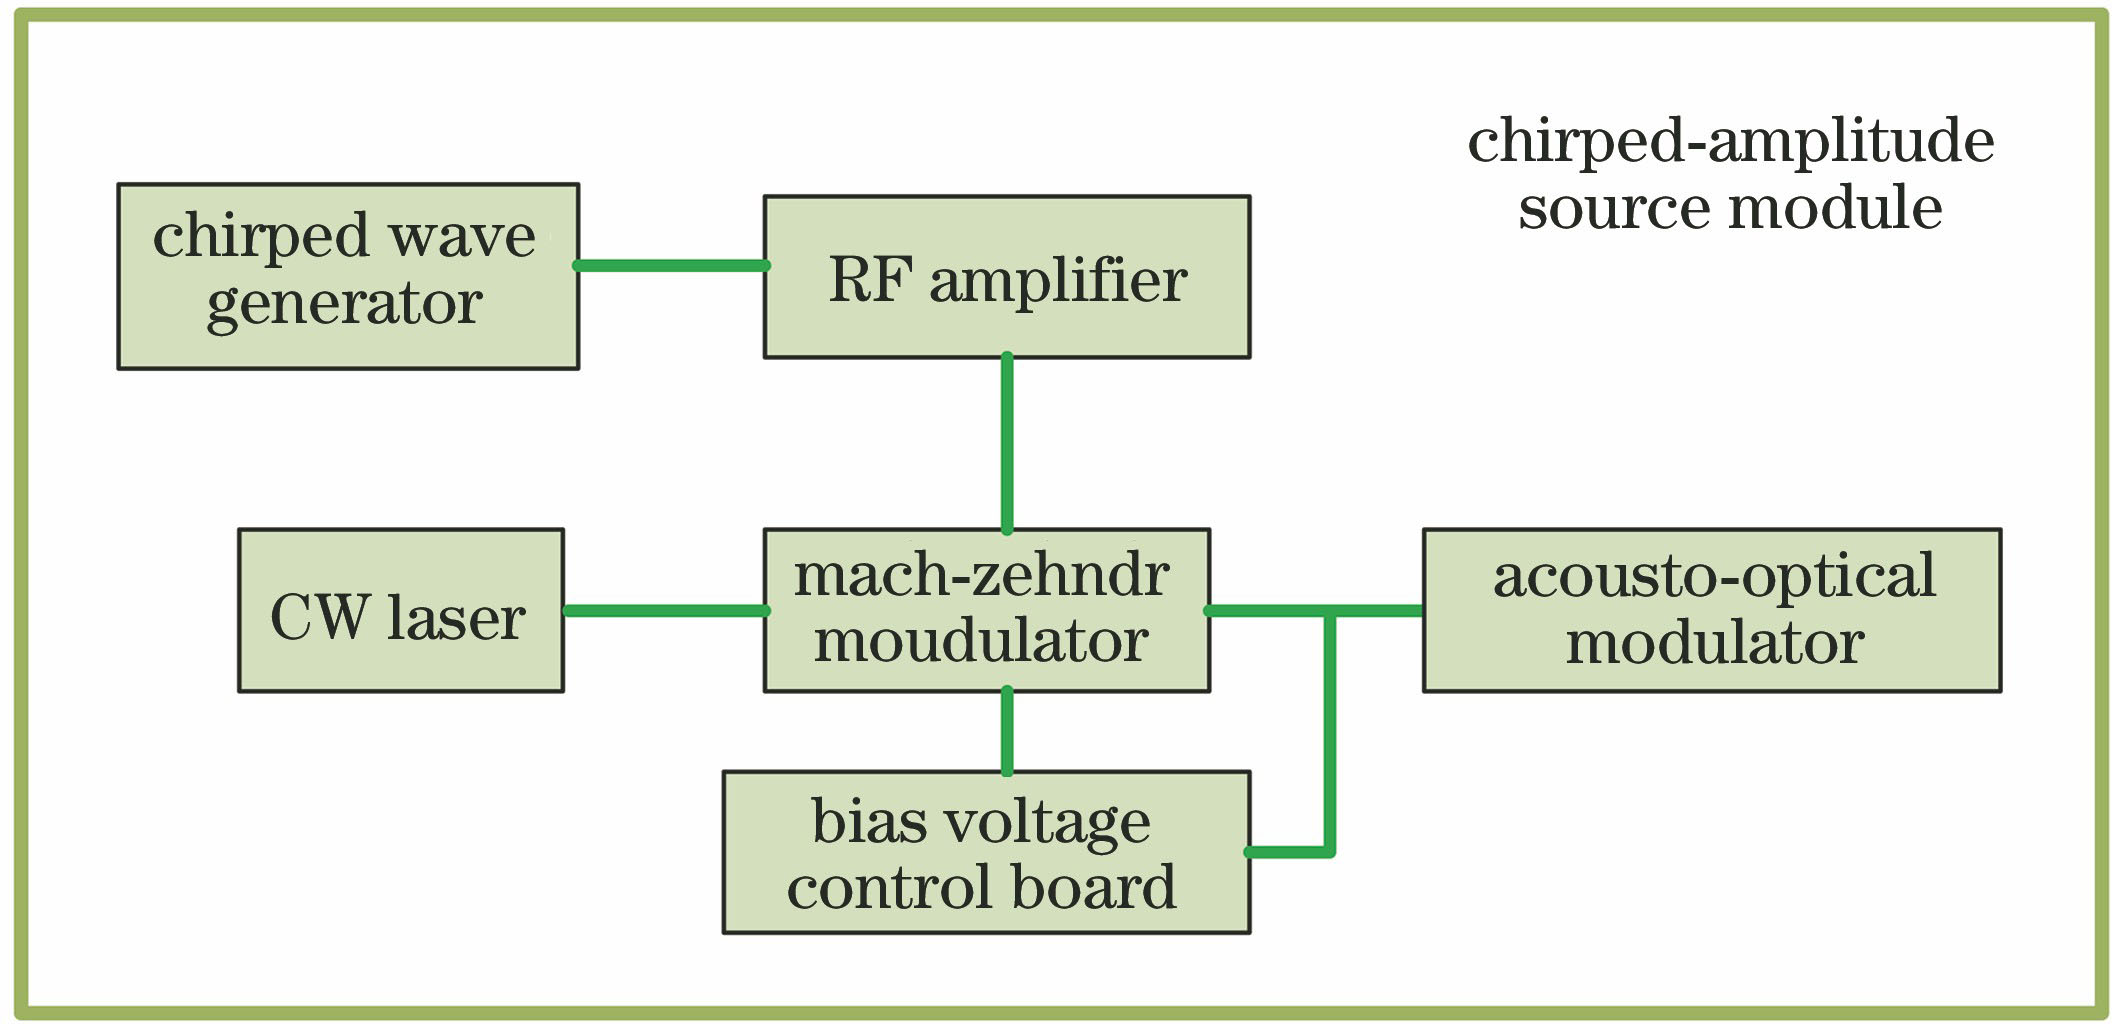 Configuration of chirped-amplitude source